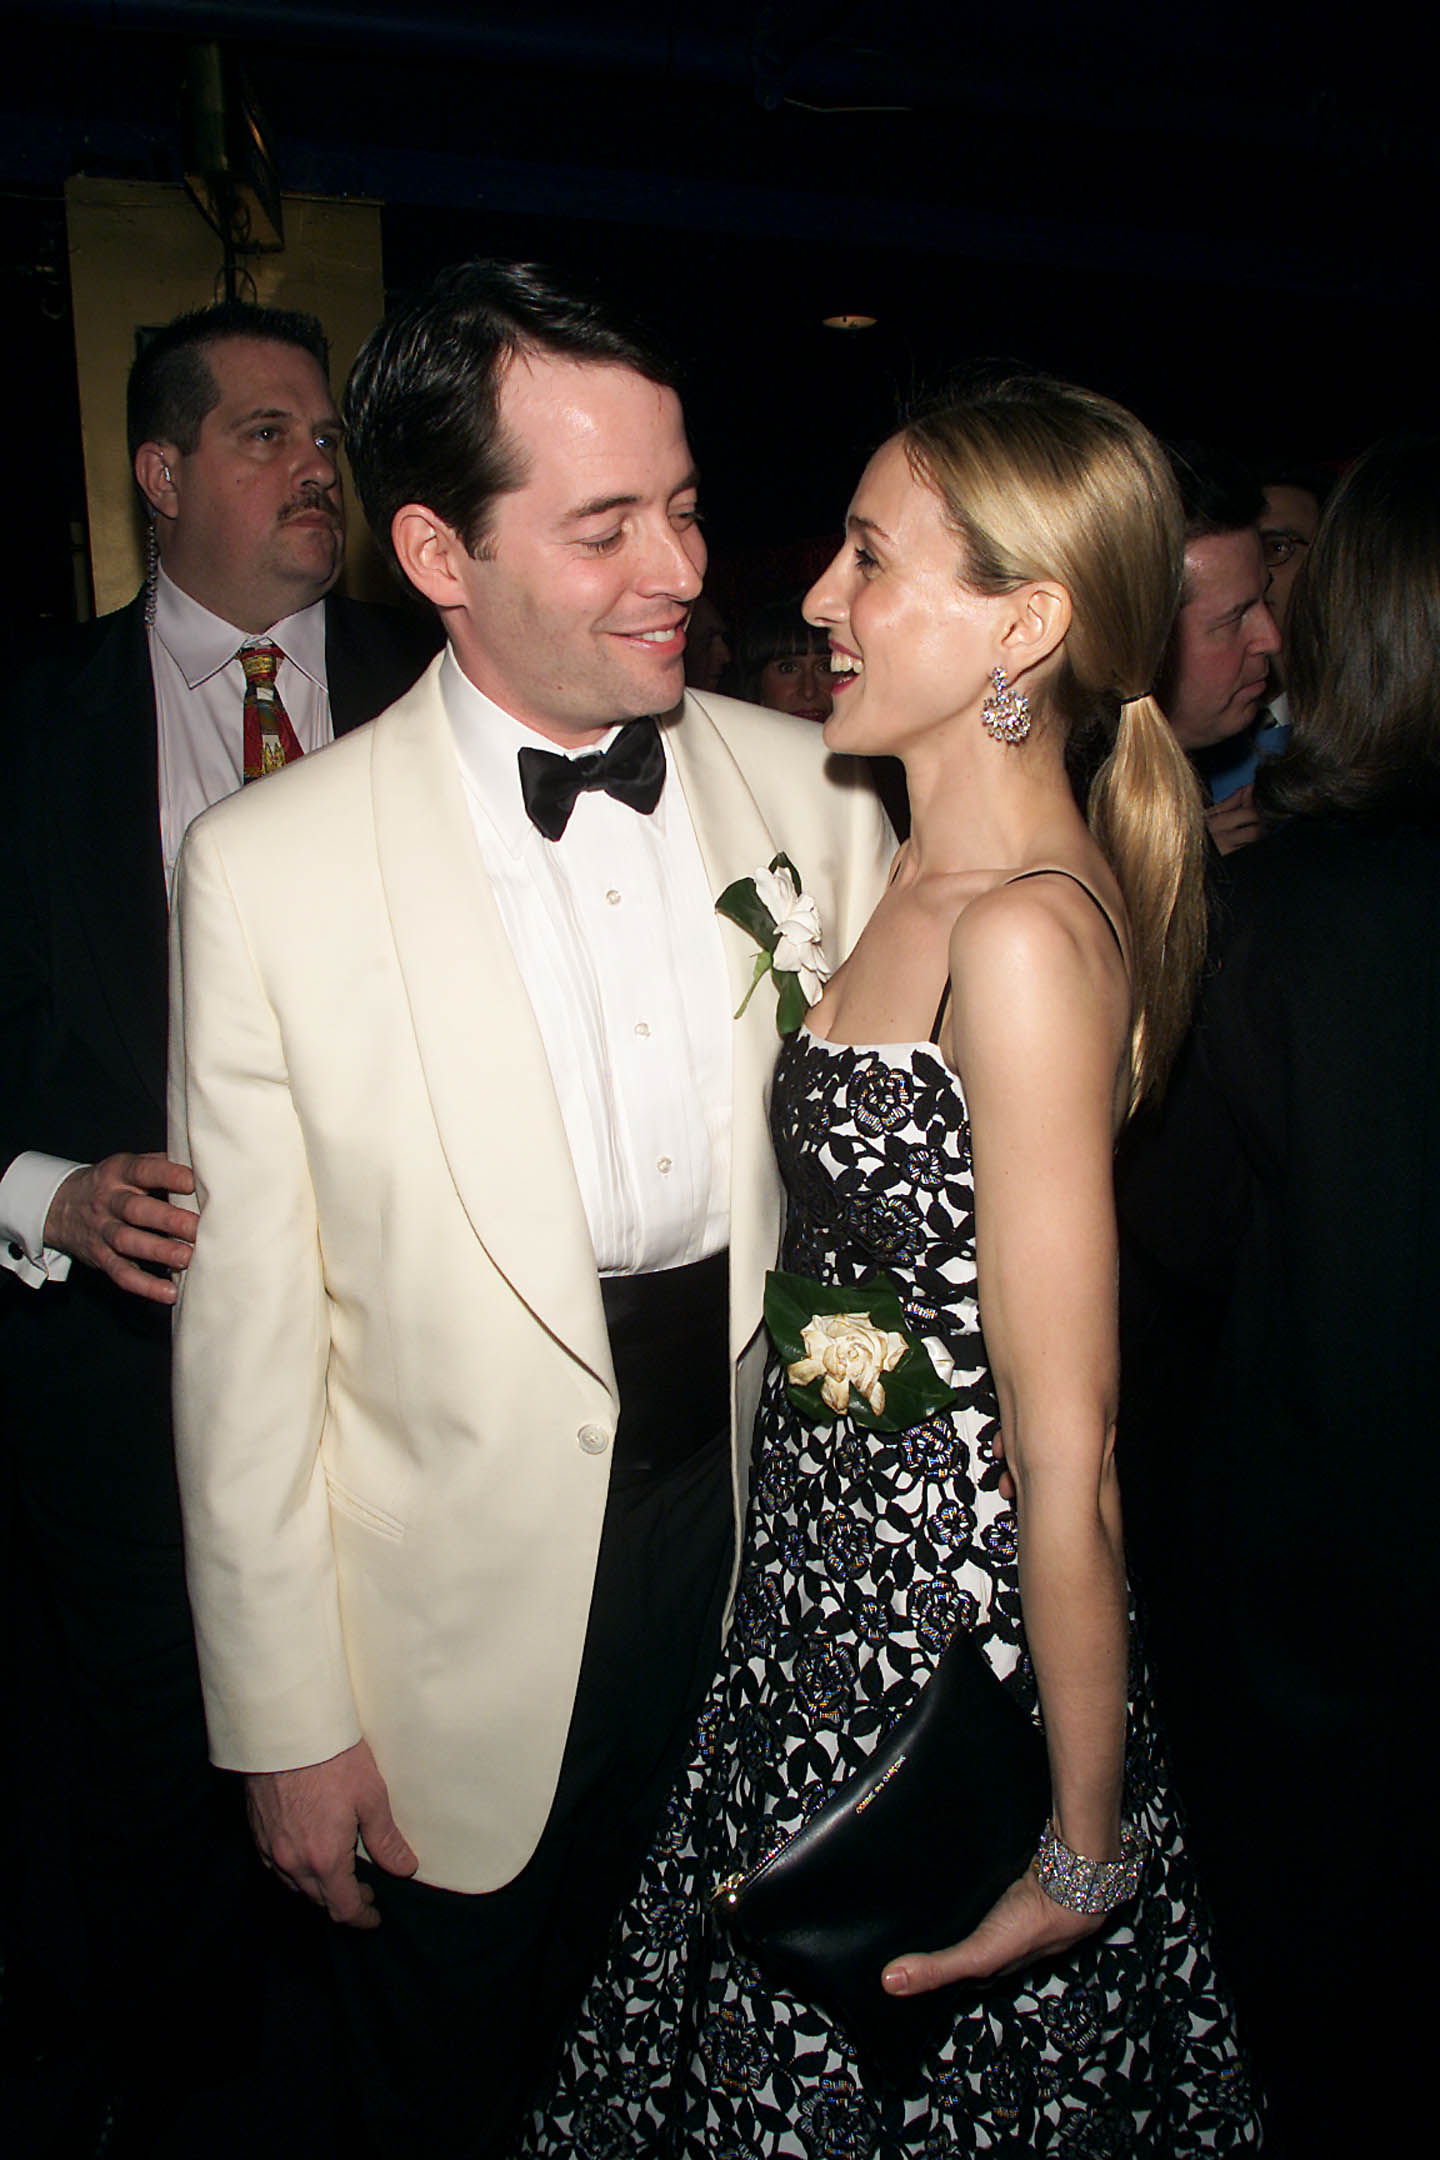 Matthew Broderick and Sarah Jessica Parker at the Broadway opening of "The Producers" after-party in New York City on April 19, 2001 | Source: Getty Images